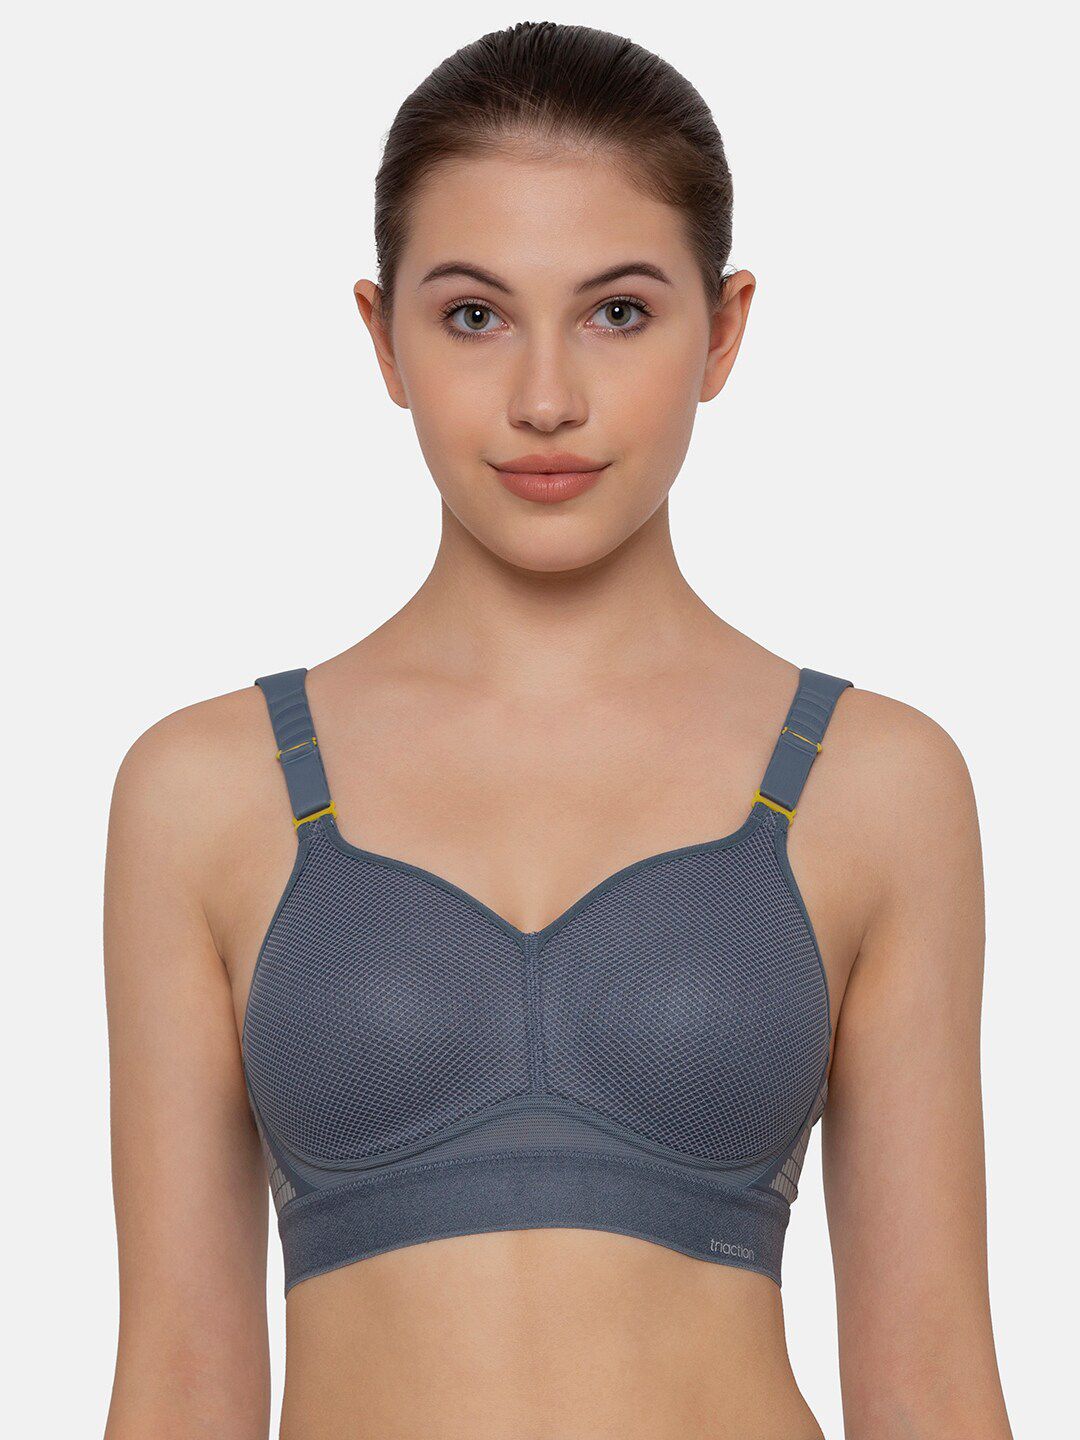 Triumph Triaction Hybrid Lite Padded Wireless High Bounce Control Sports Bra Price in India